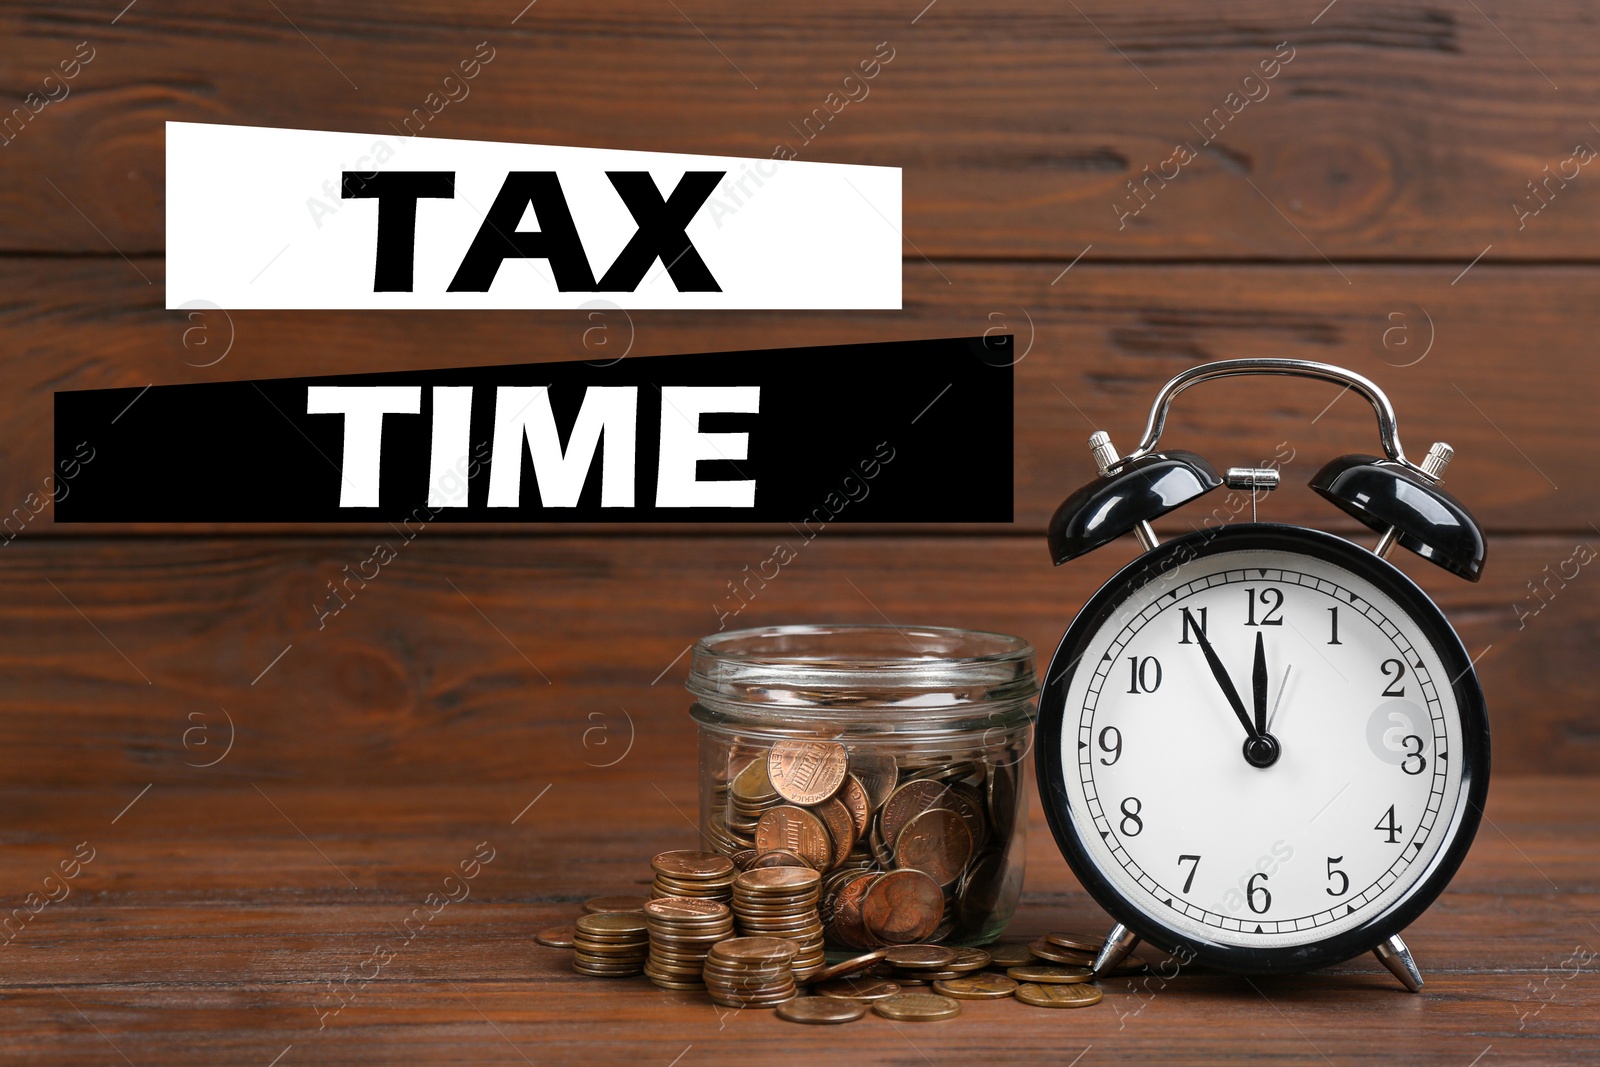 Image of Time to pay taxes. Alarm clock, glass jar and coins on wooden table